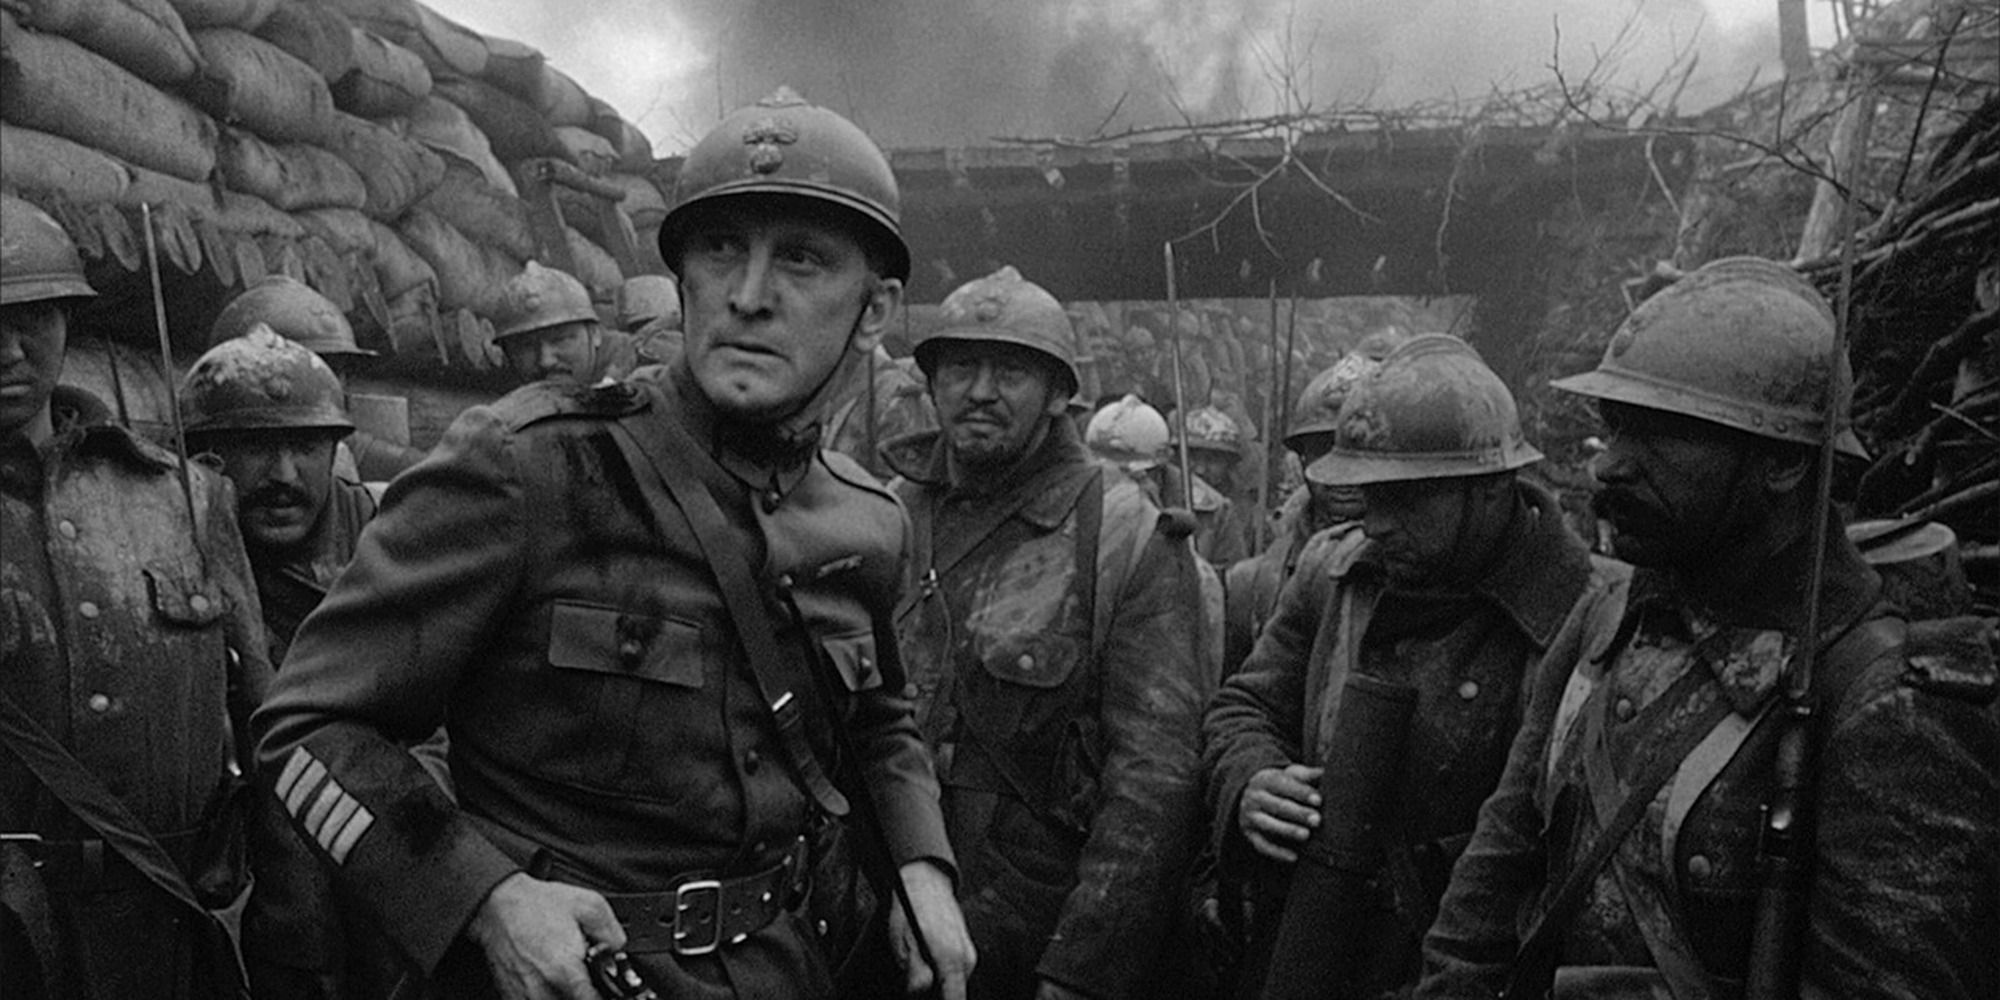 WWI soldiers in a dirty trench in Paths of Glory